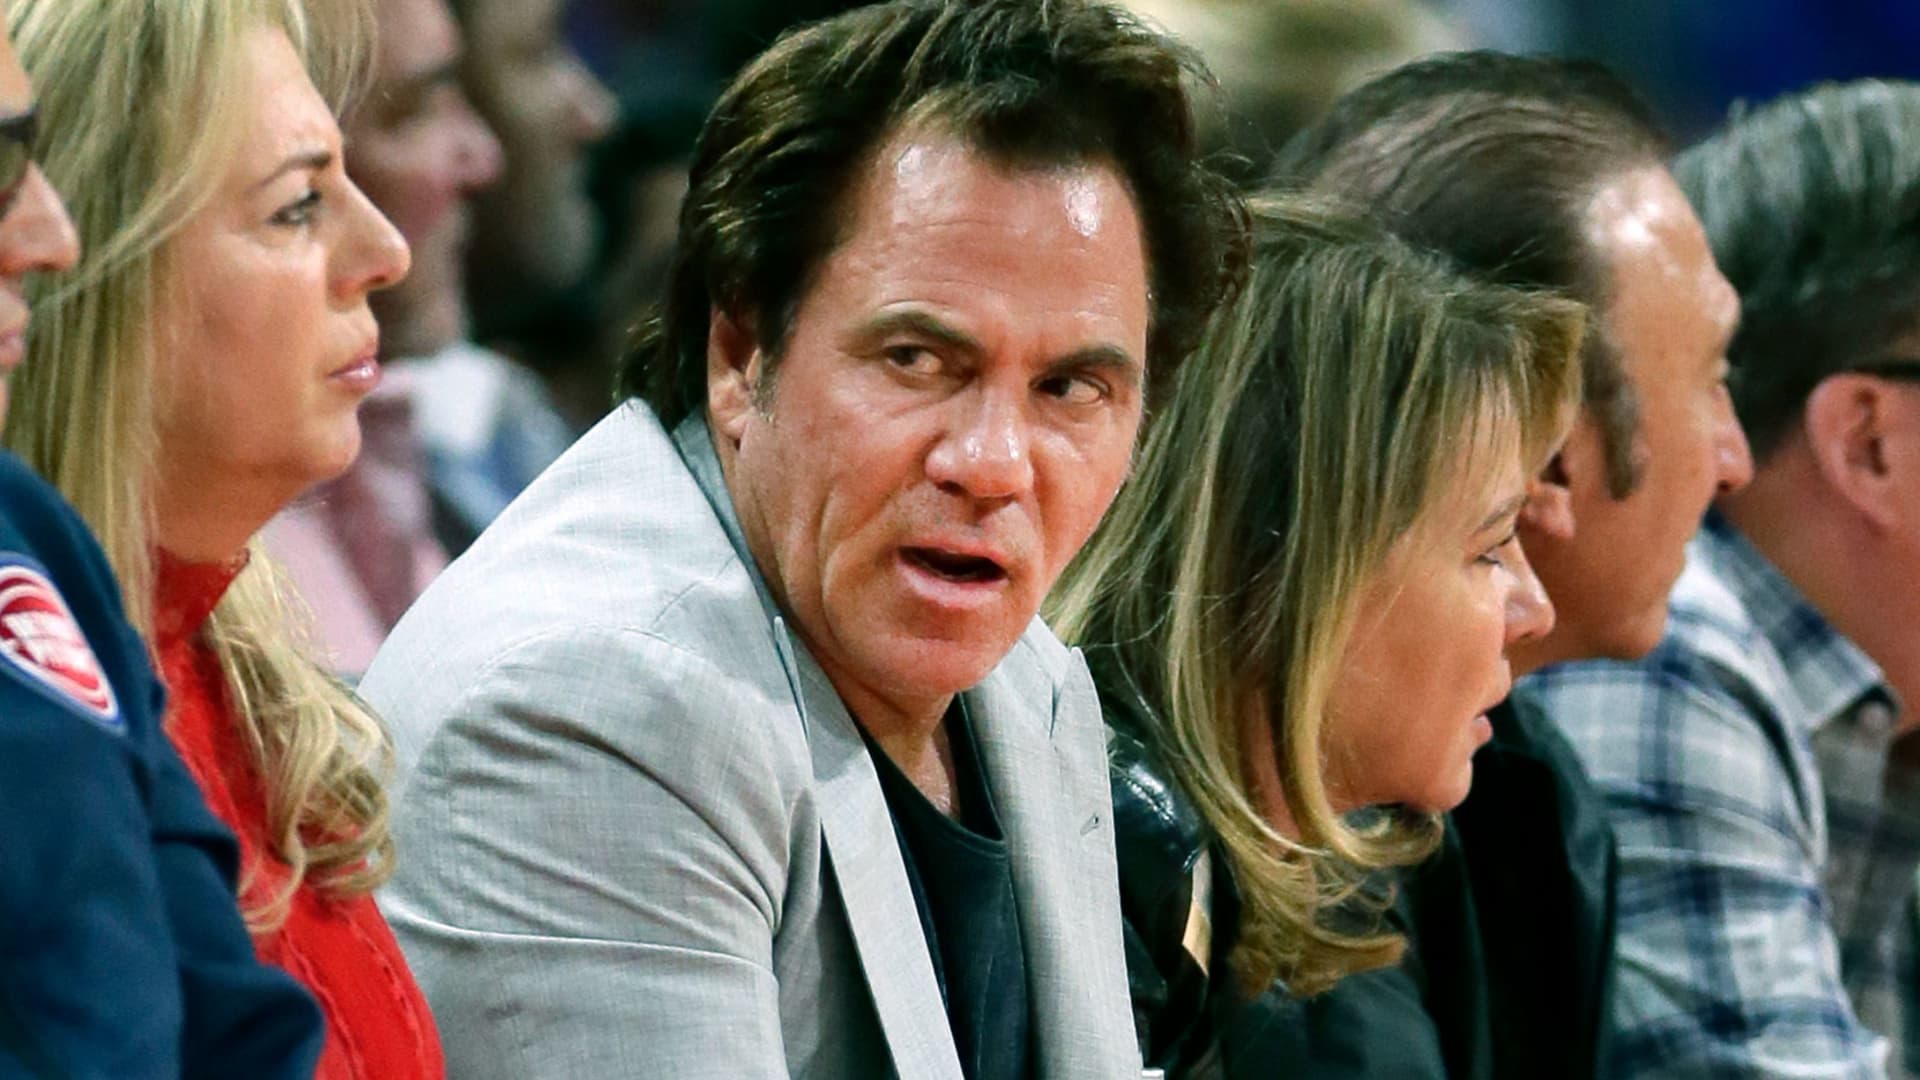 Detroit Pistons owner Tom Gores during the first round of the 2019 NBA Eastern Conference Playoffs against the Milwaukee Bucks at Little Caesars Arena on April 22, 2019 in Detroit, Michigan.